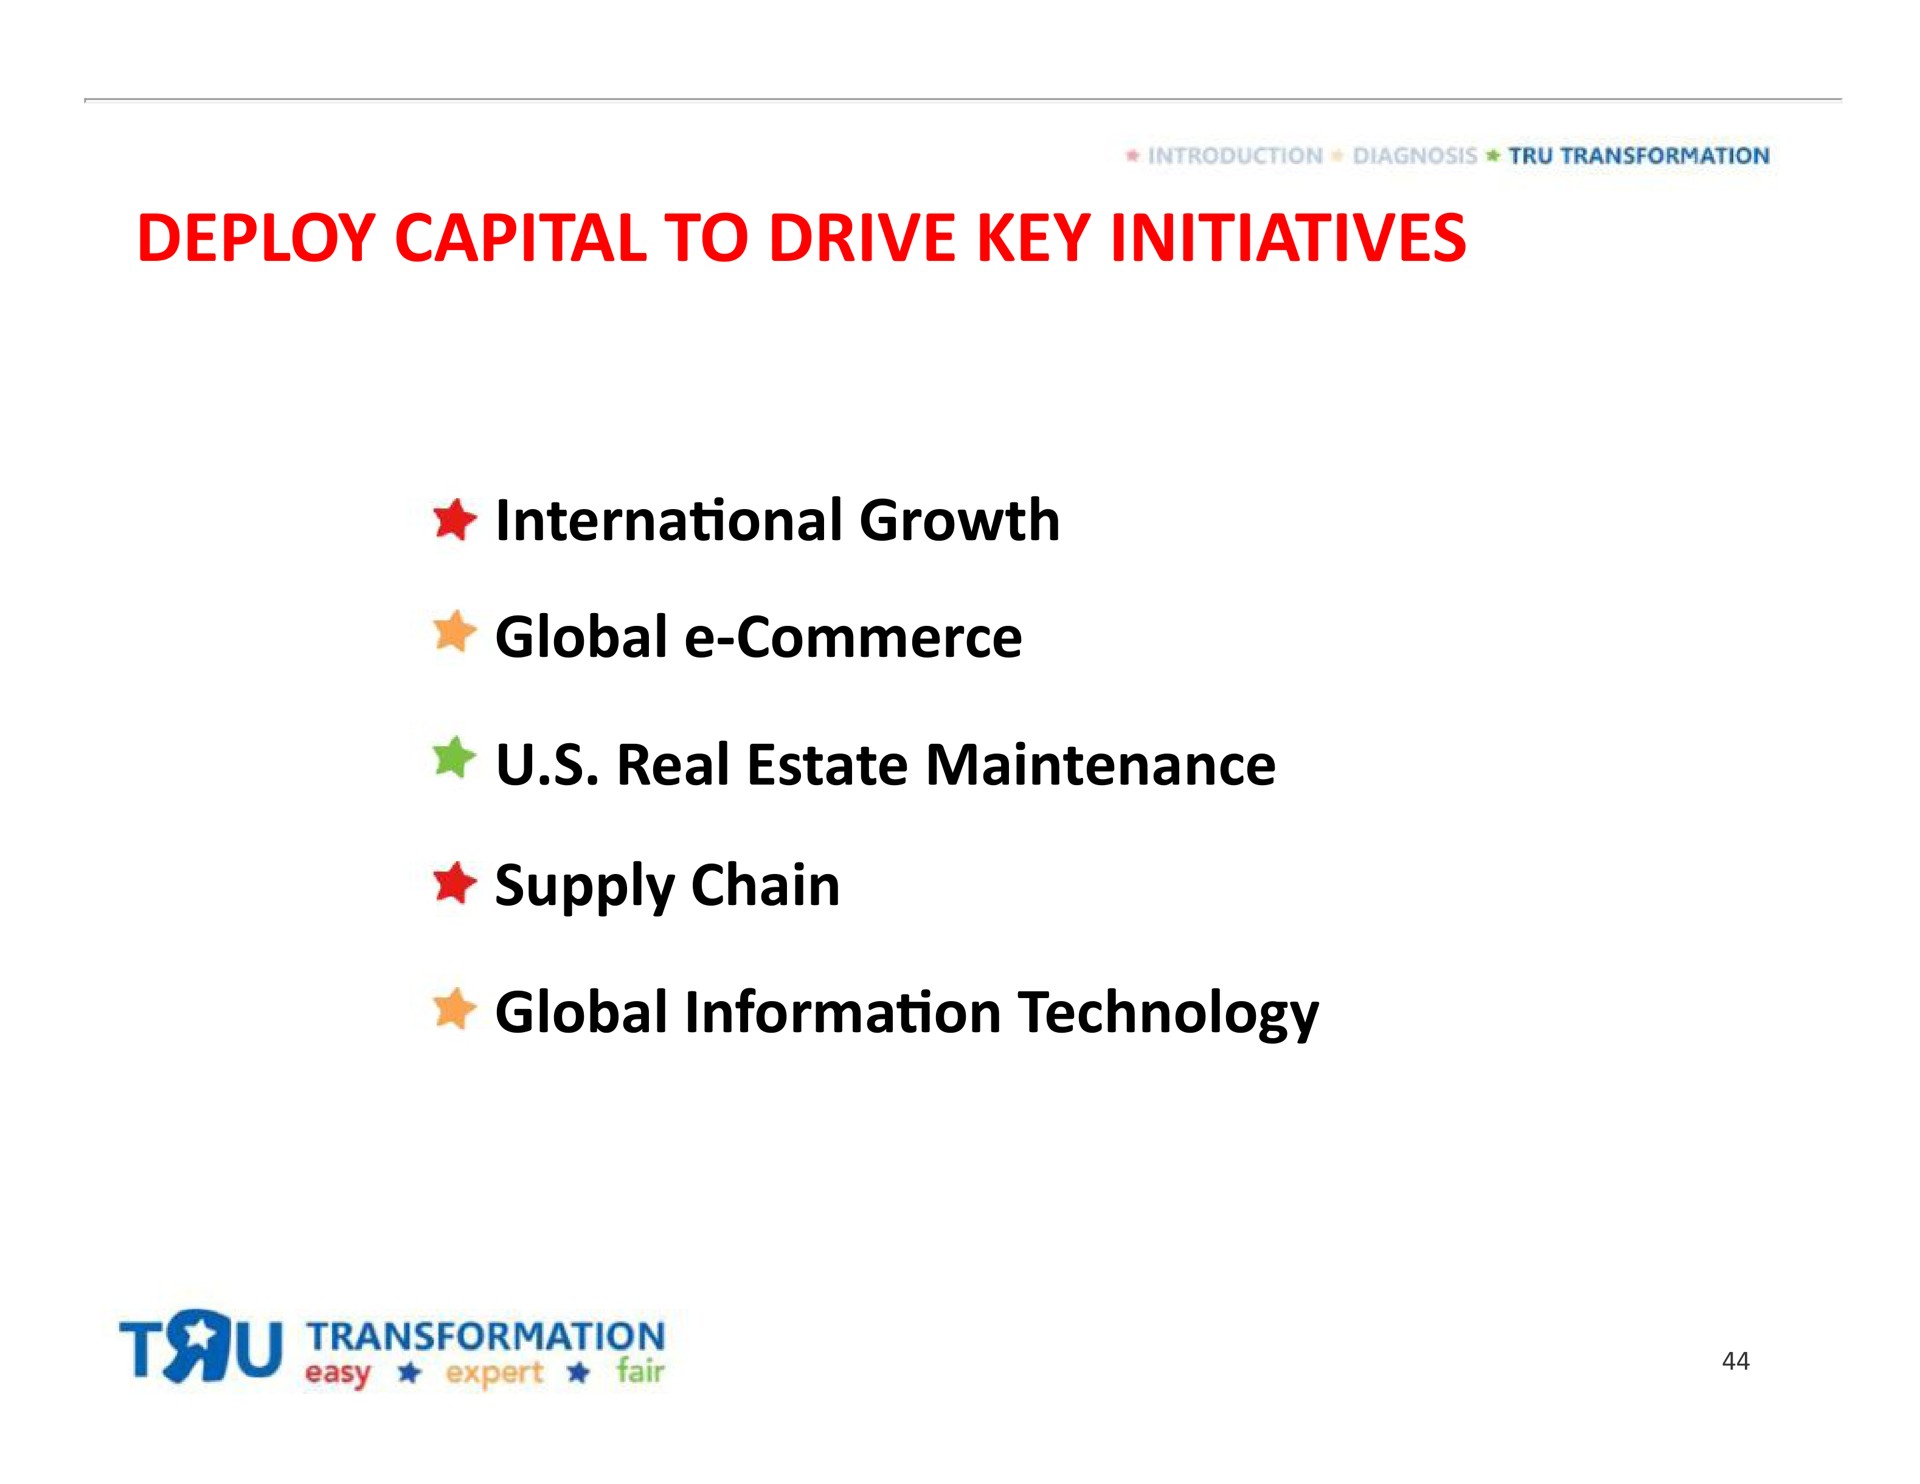 deploy capital to drive key initiatives growth global commerce real estate maintenance supply chain global on technology international information | Toys R Us